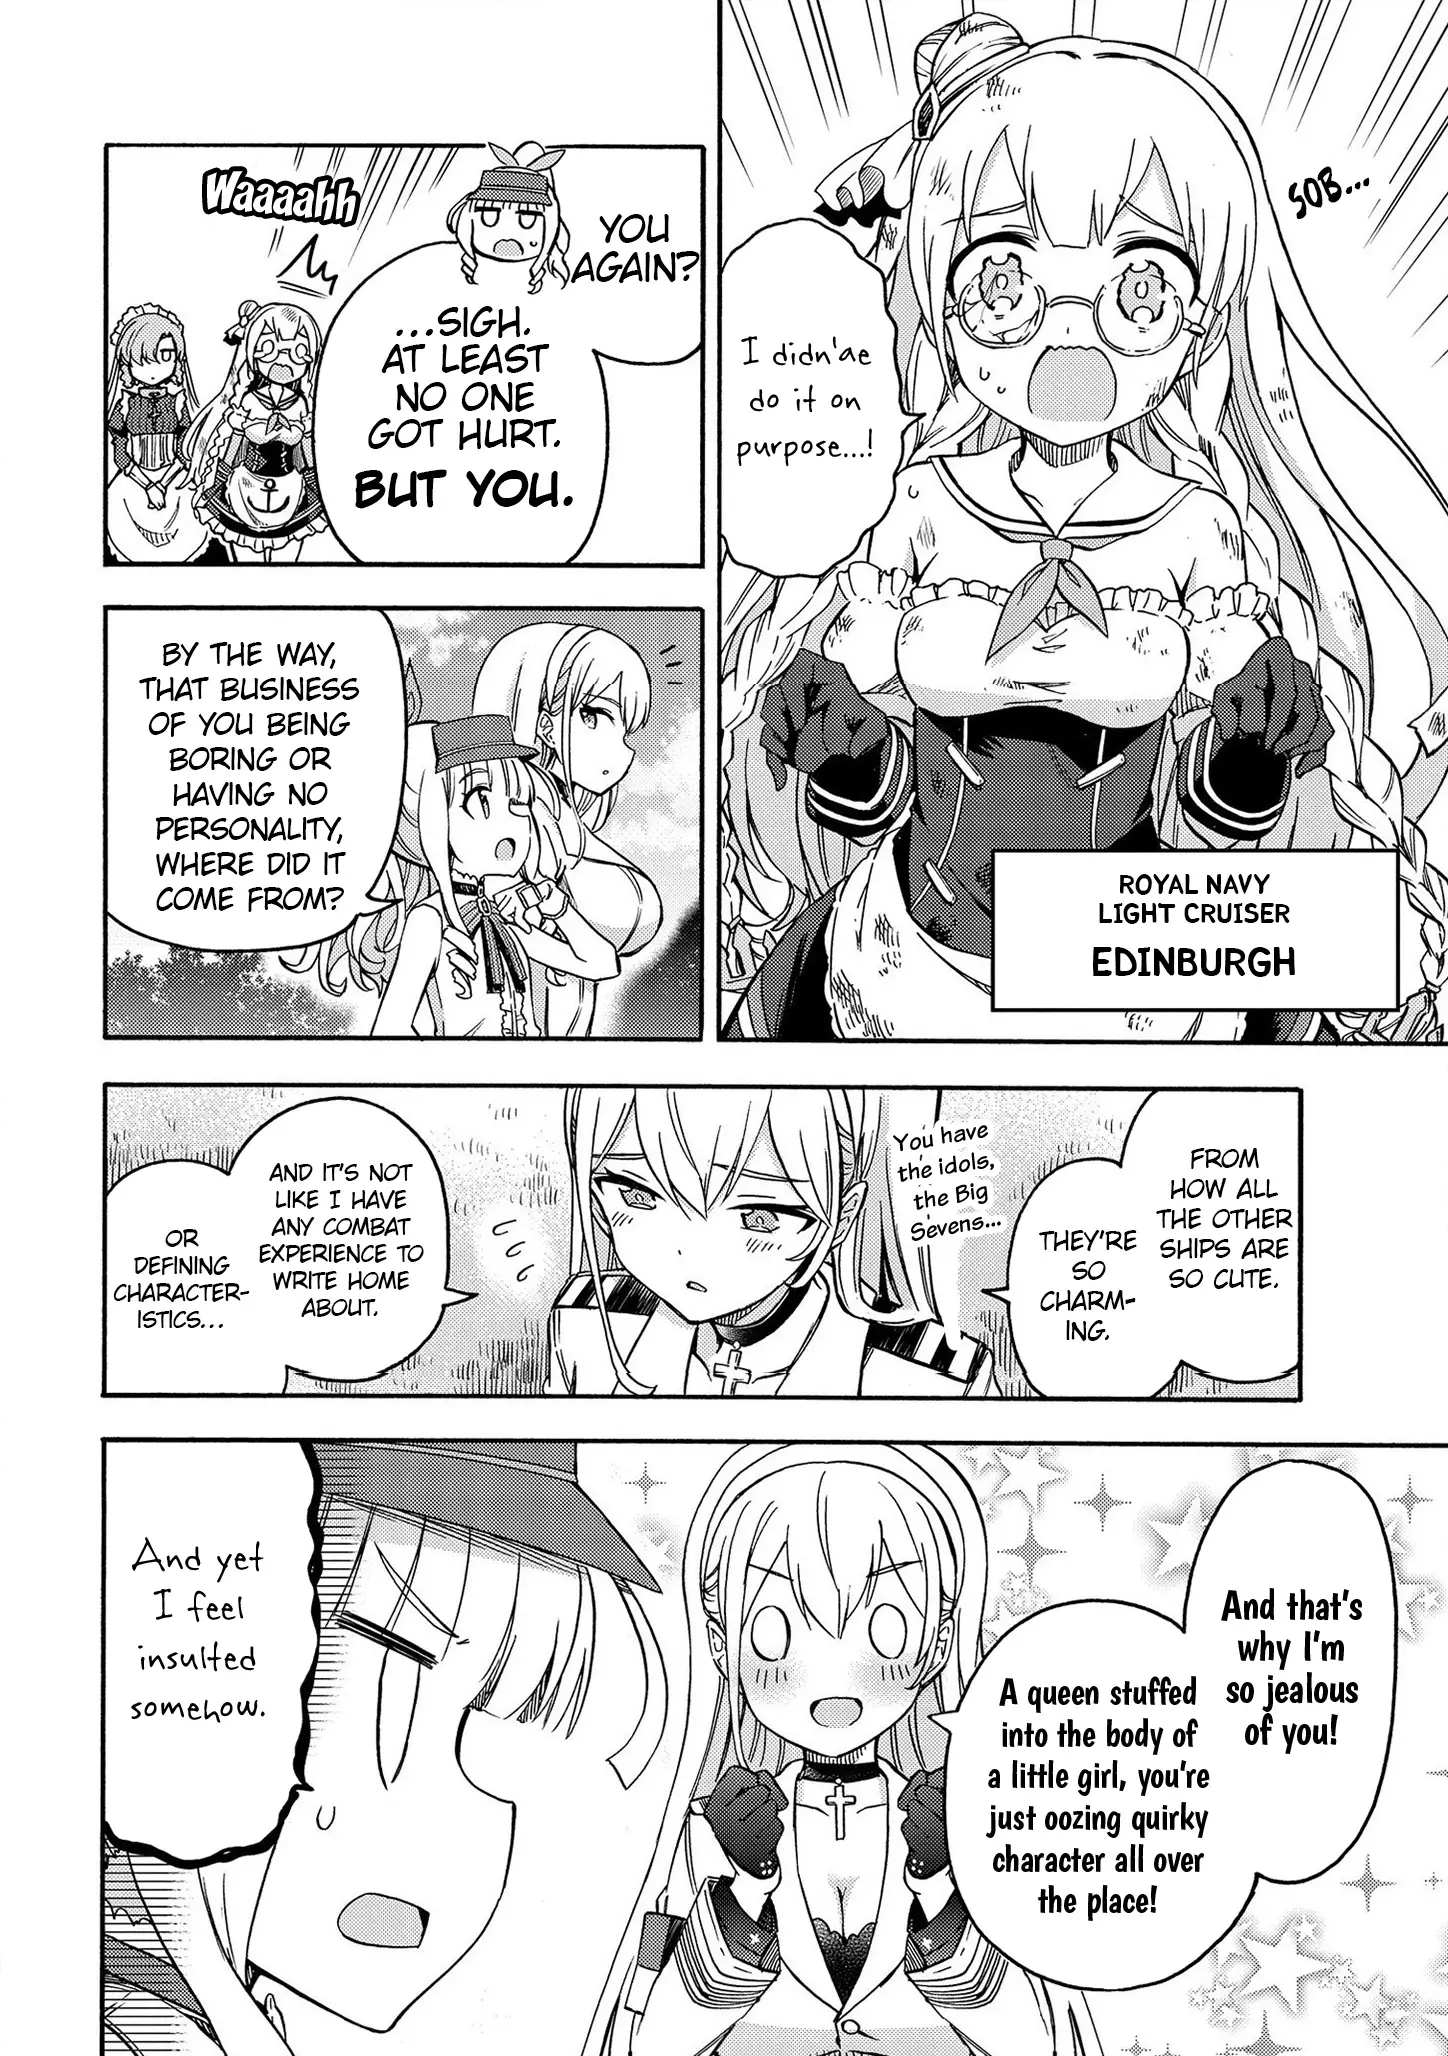 Azur Lane: Queen's Orders - 70 page 2-7fd528dc